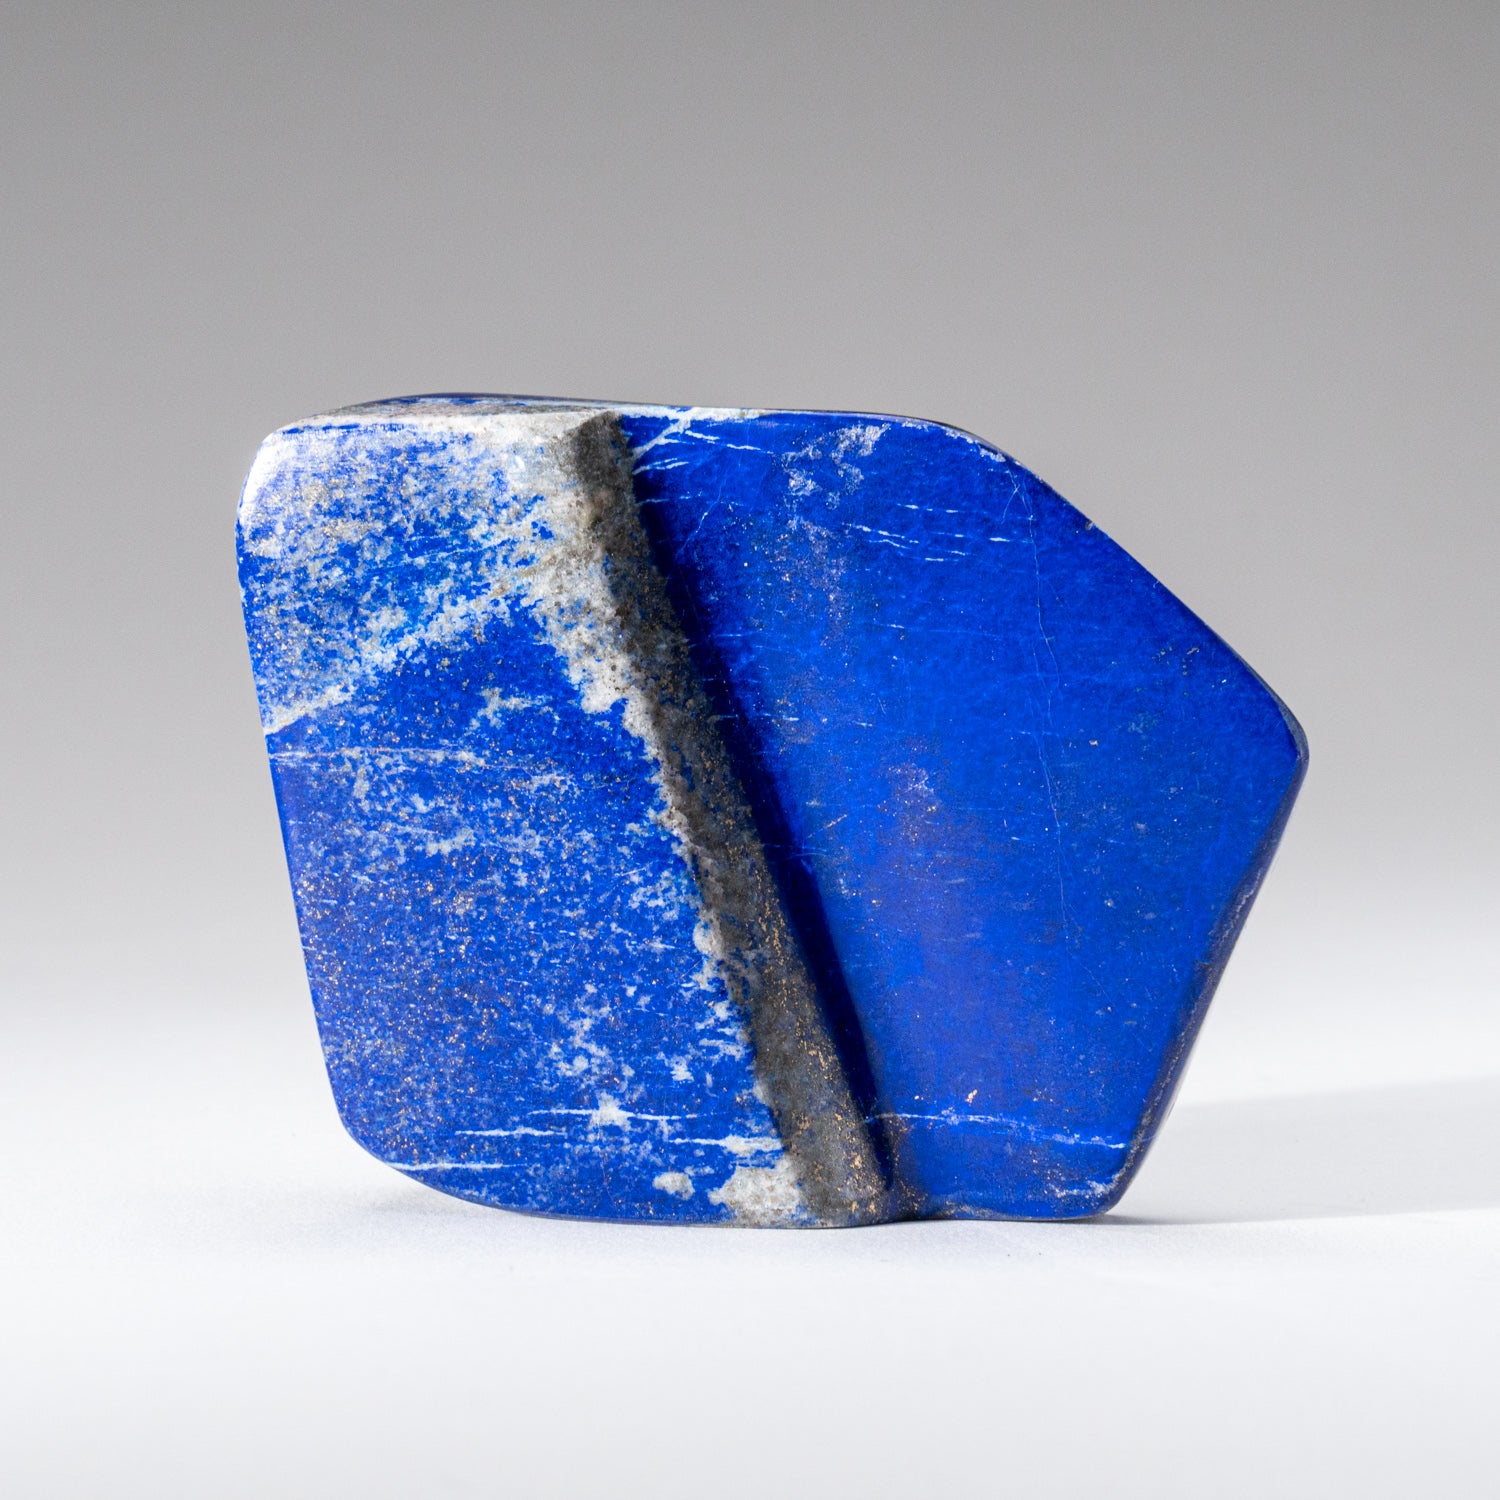 Polished Lapis Lazuli Freeform from Afghanistan (390 grams)